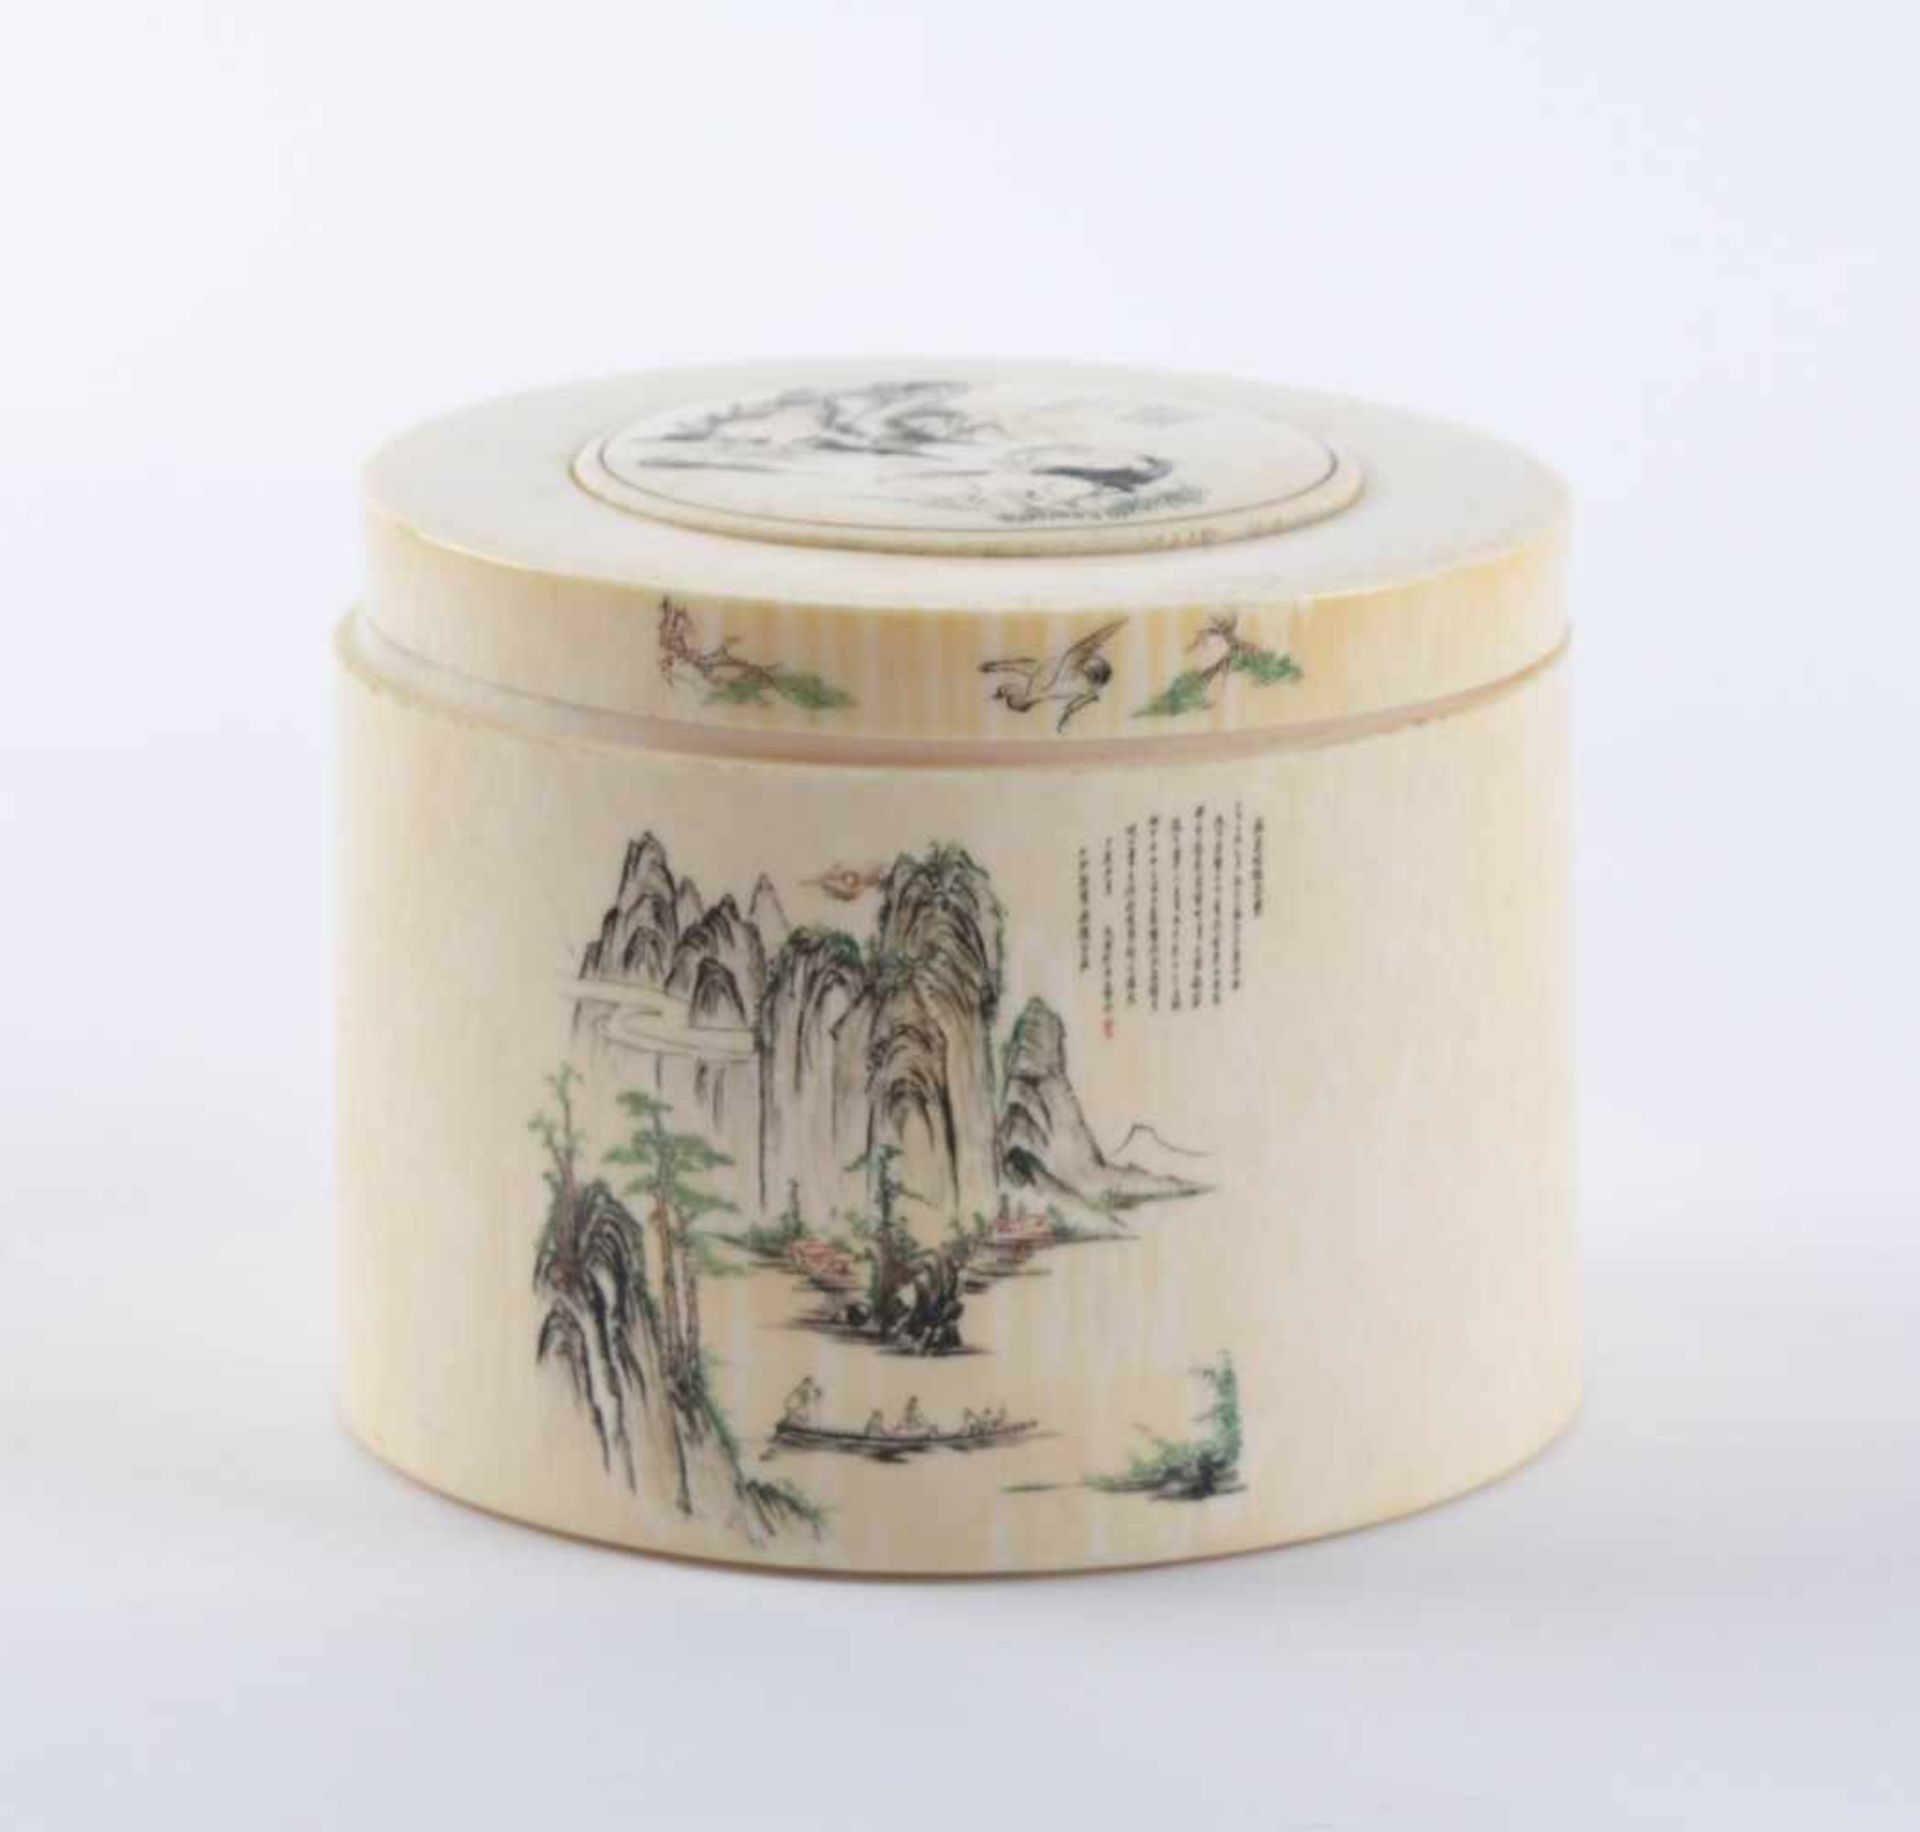 Ivory lidded box late Qing Dynastyon the lid, on the front and back with micro carvings of the